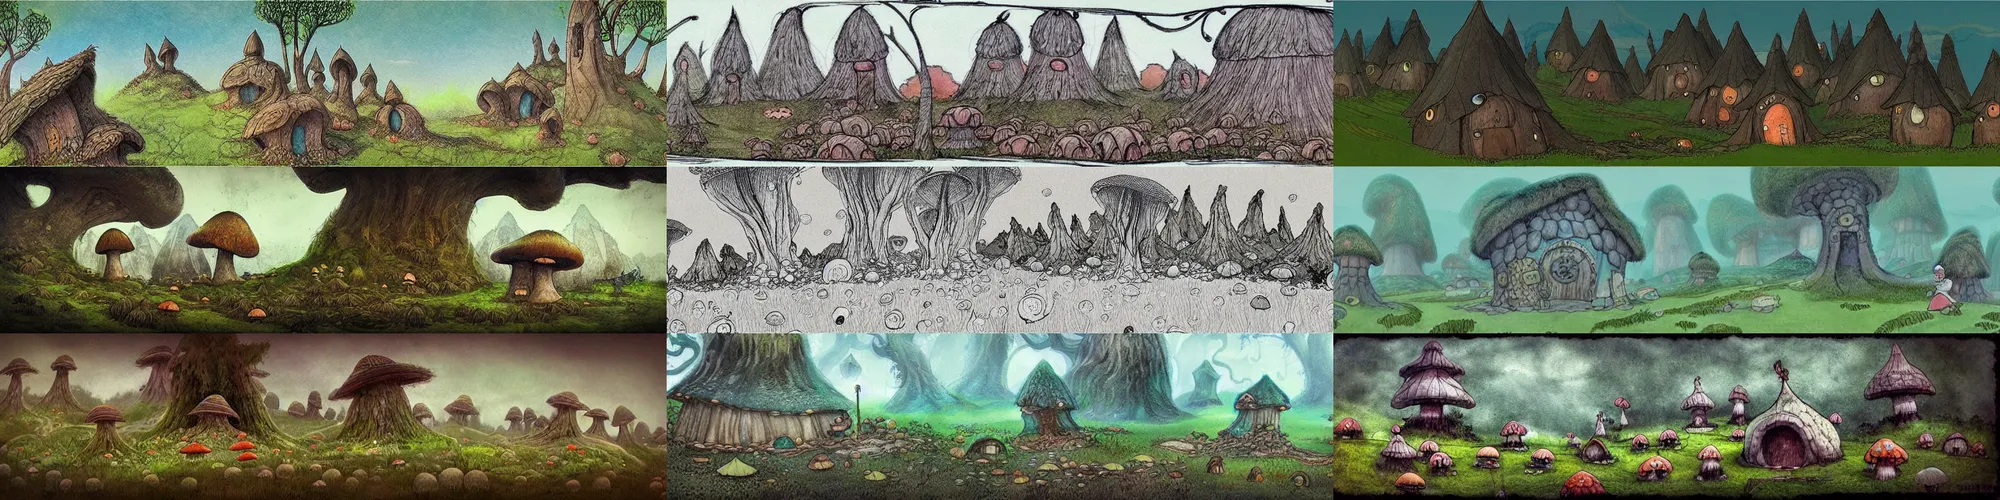 Prompt: “wide shot, concept art, trolls in a fairytale landscape with mushroom houses, in the style of John Bauer and wimmelbilder”